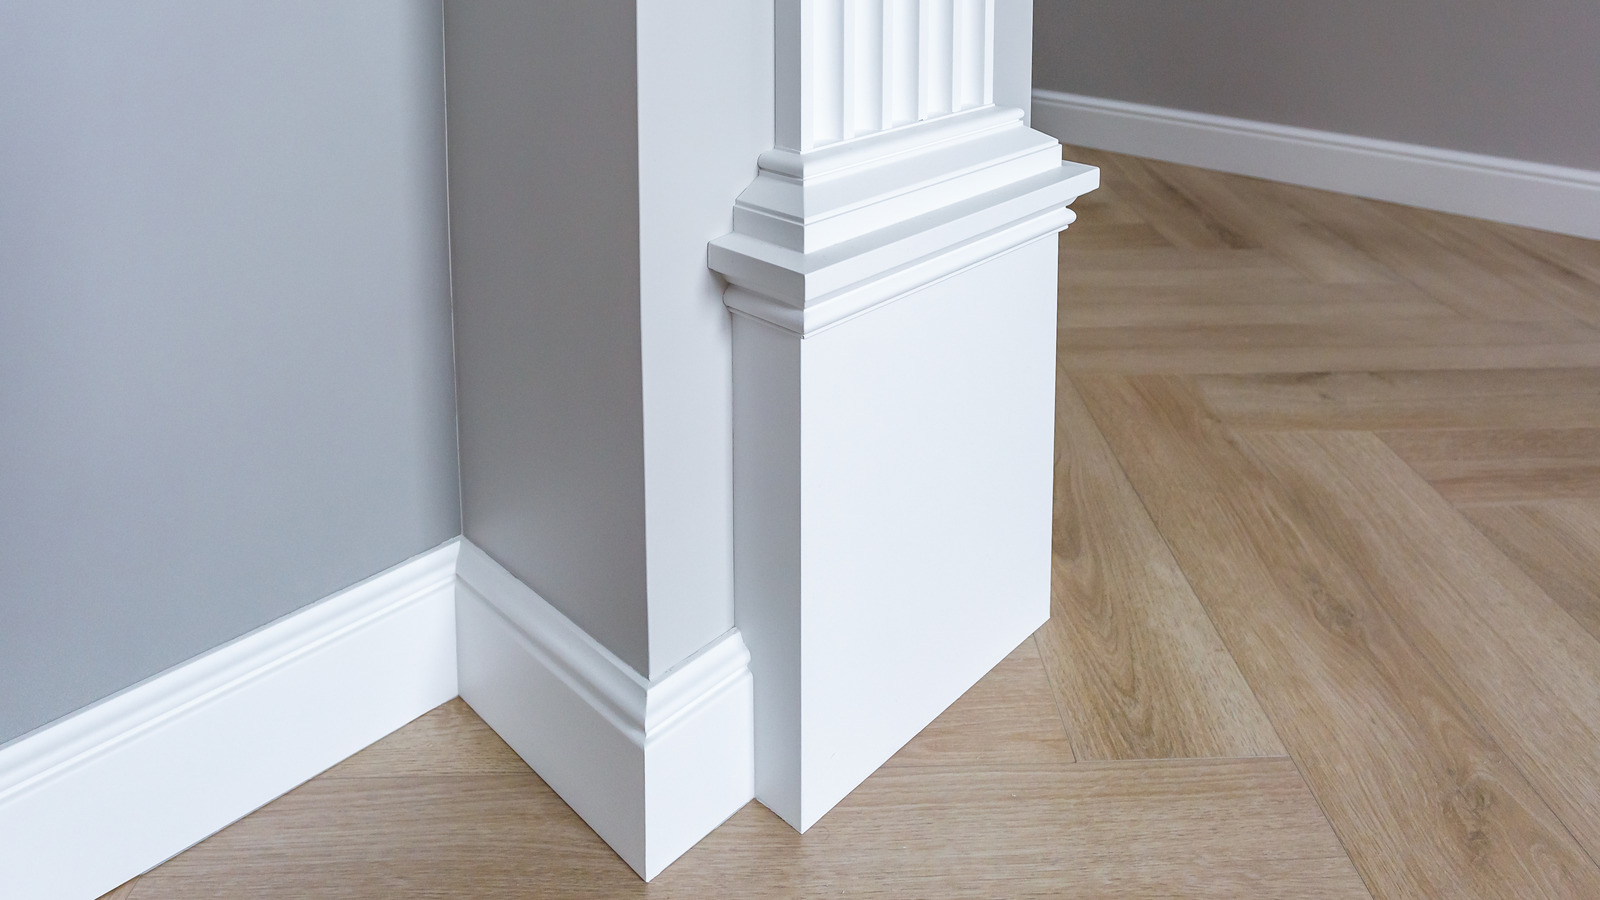 https://www.housedigest.com/img/gallery/home-depot-or-lowes-which-has-better-deals-on-molding/l-intro-1672325231.jpg